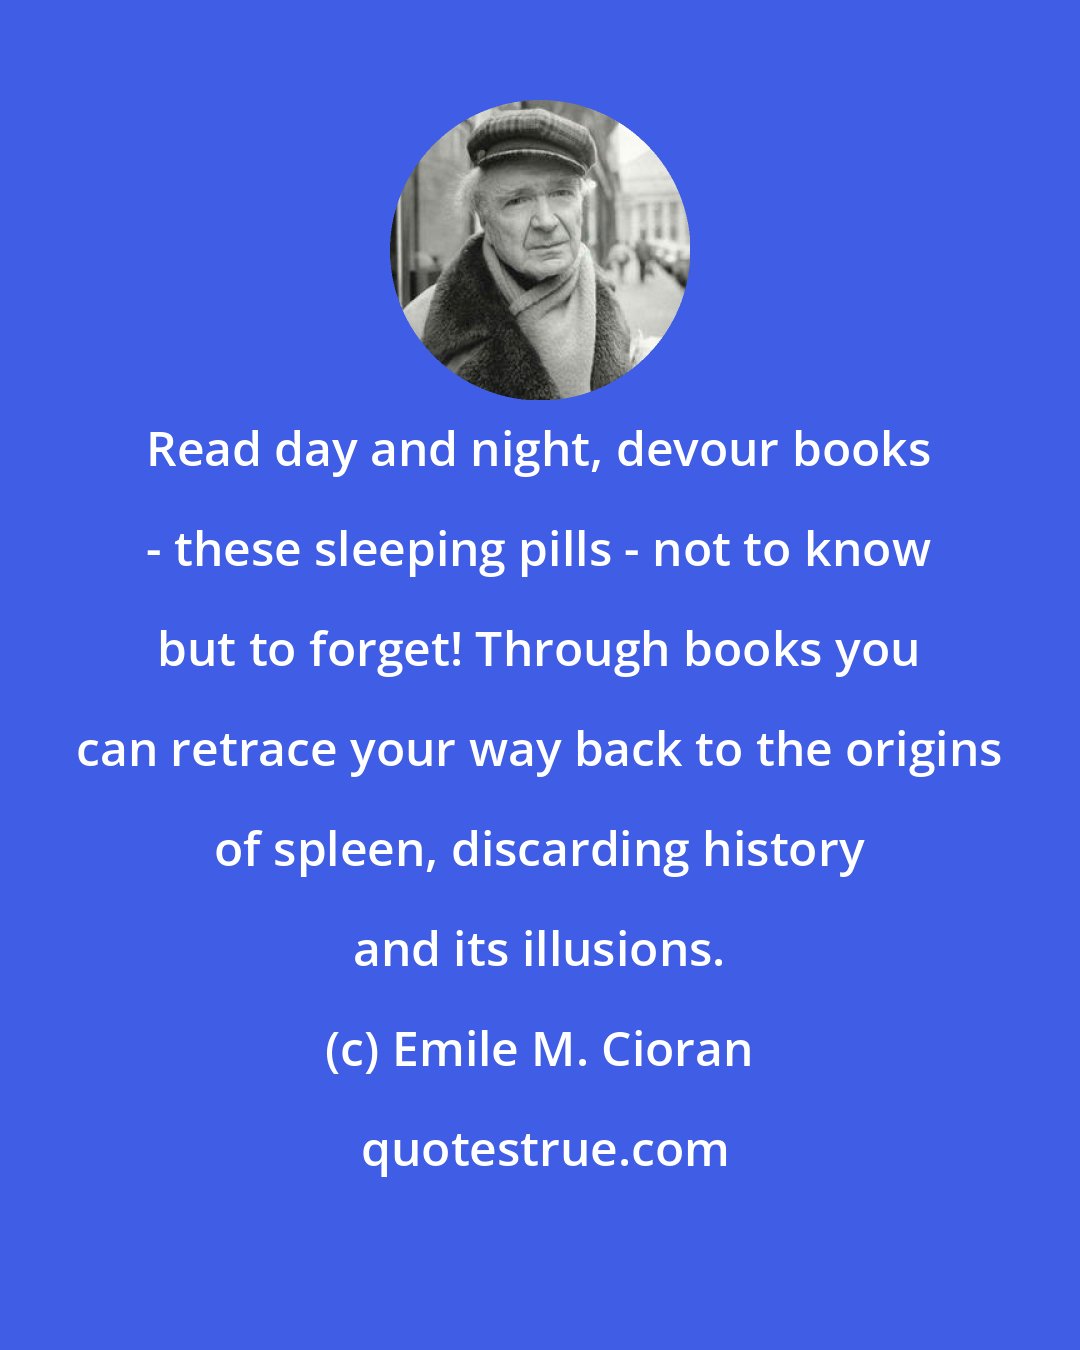 Emile M. Cioran: Read day and night, devour books - these sleeping pills - not to know but to forget! Through books you can retrace your way back to the origins of spleen, discarding history and its illusions.